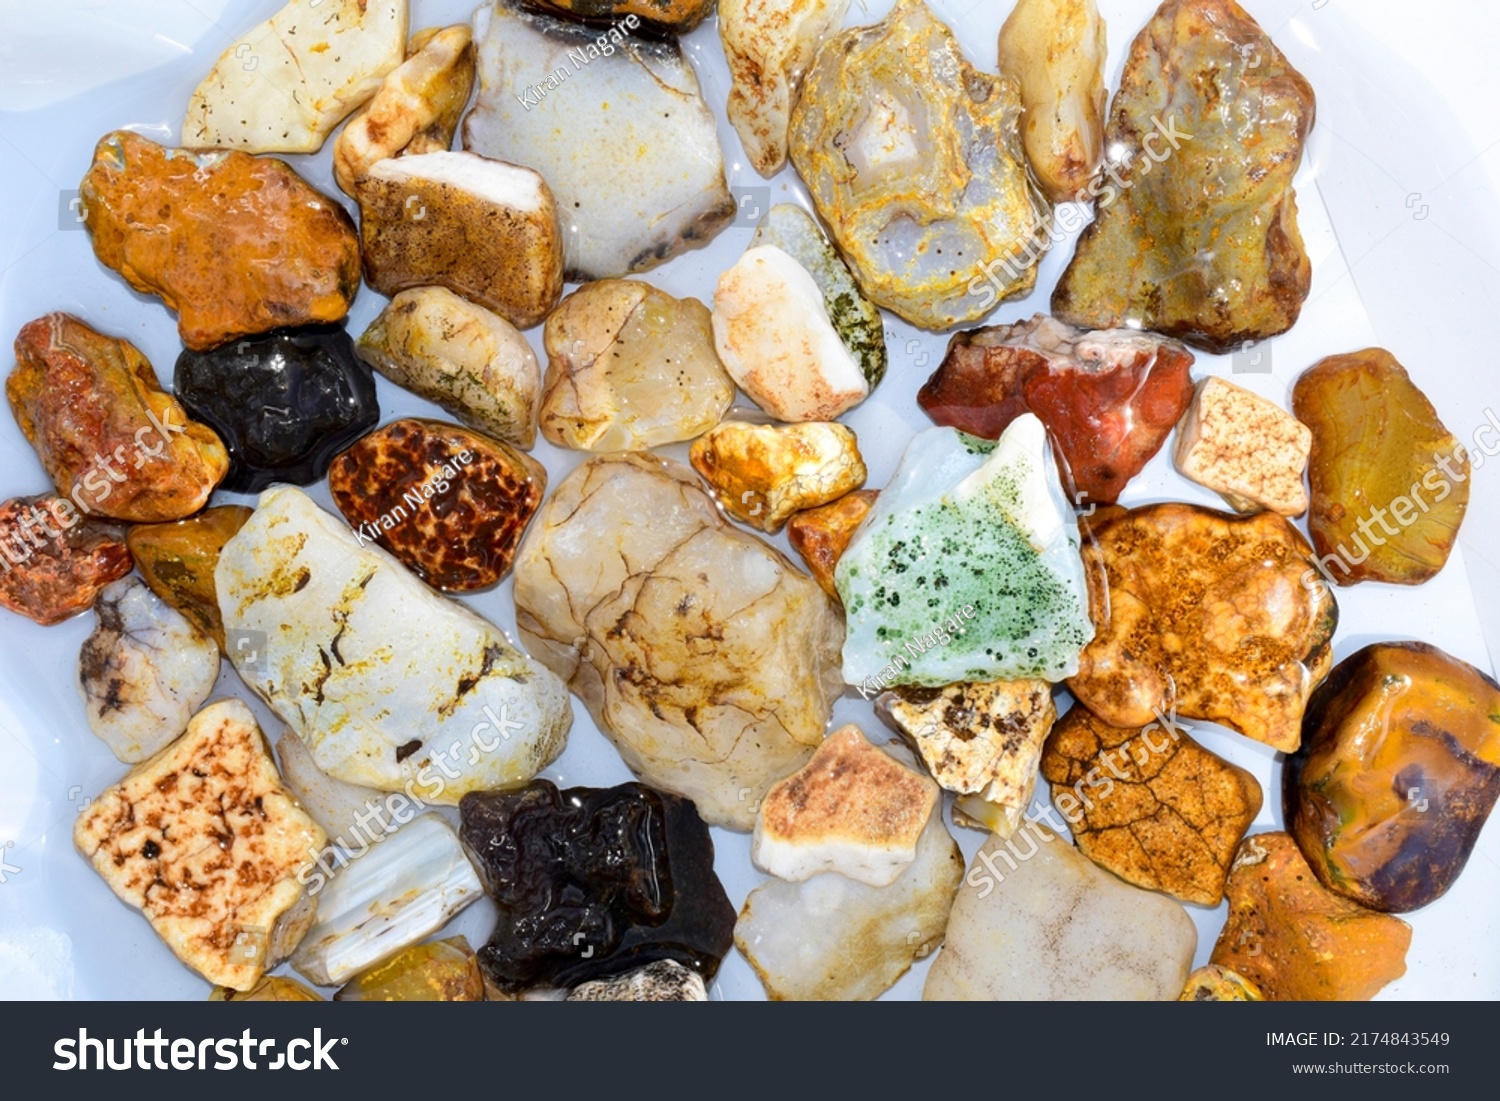 Colorful collection of small river stones on white background, River stones background. #2174843549